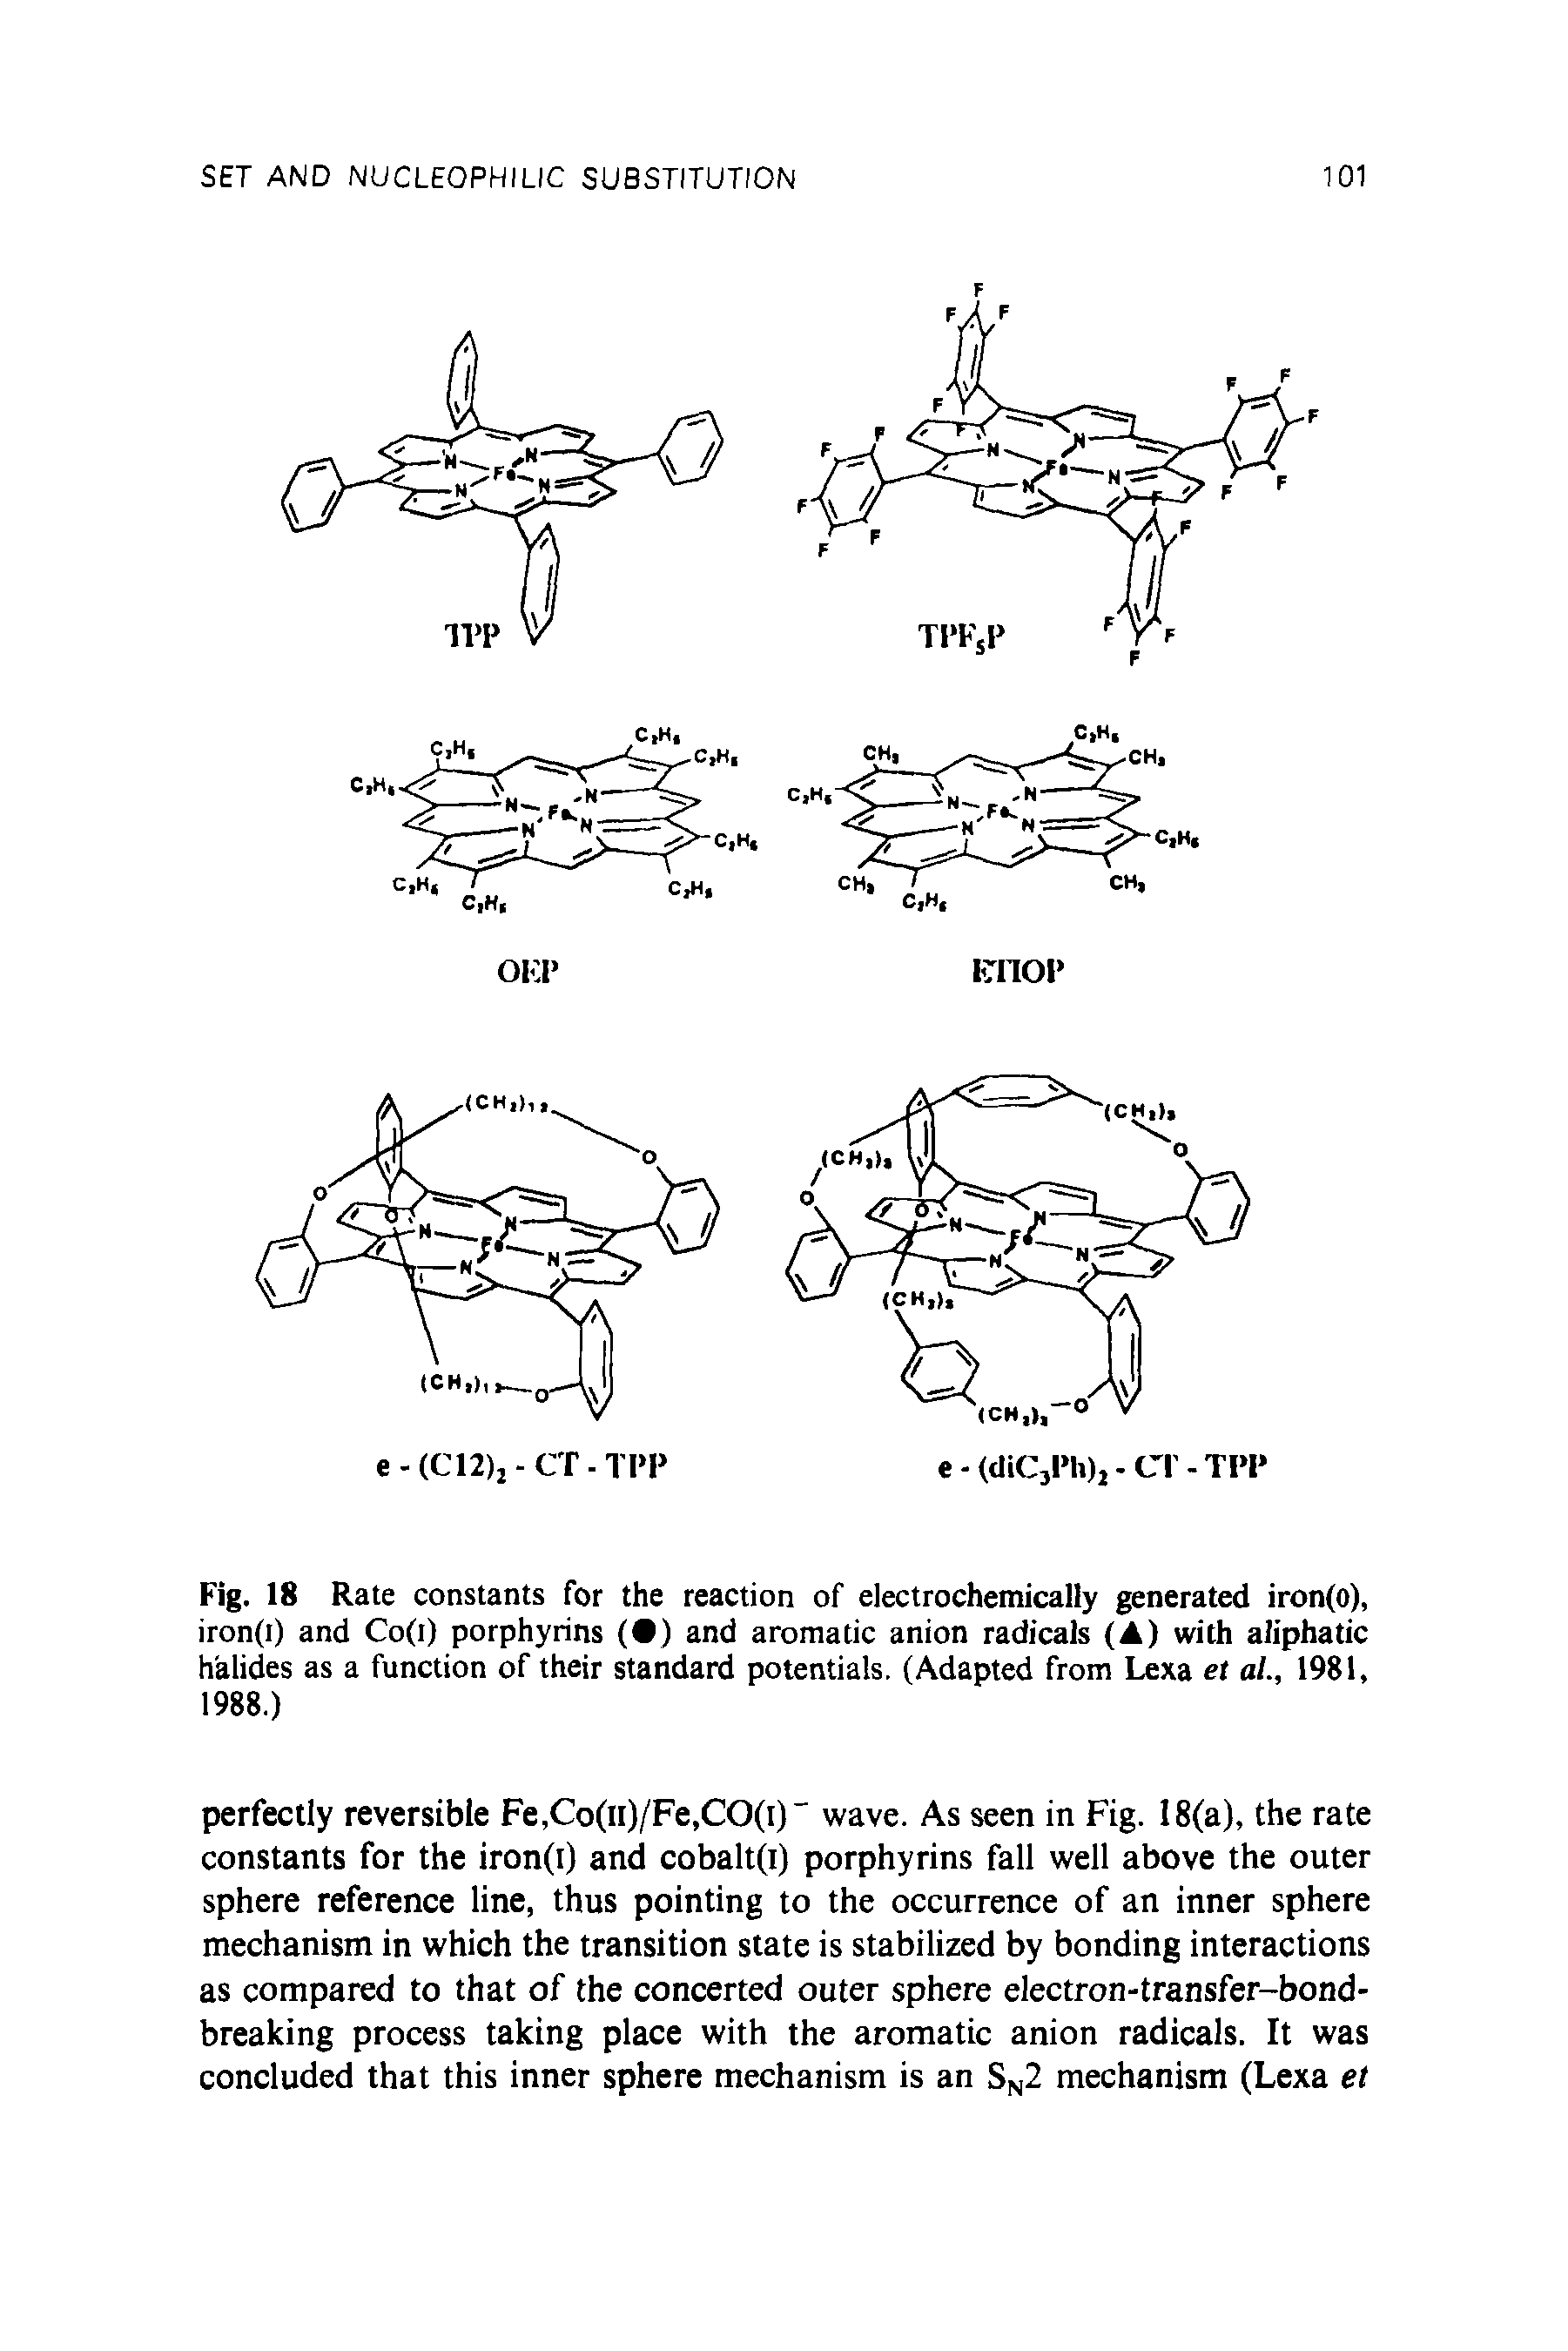 Fig. 18 Rate constants for the reaction of electrochemically generated iron(o), iron(i) and Co(i) porphyrins ( ) and aromatic anion radicals (A) with aliphatic halides as a function of their standard potentials, (Adapted from Lexa et al., 1981, 1988.)...